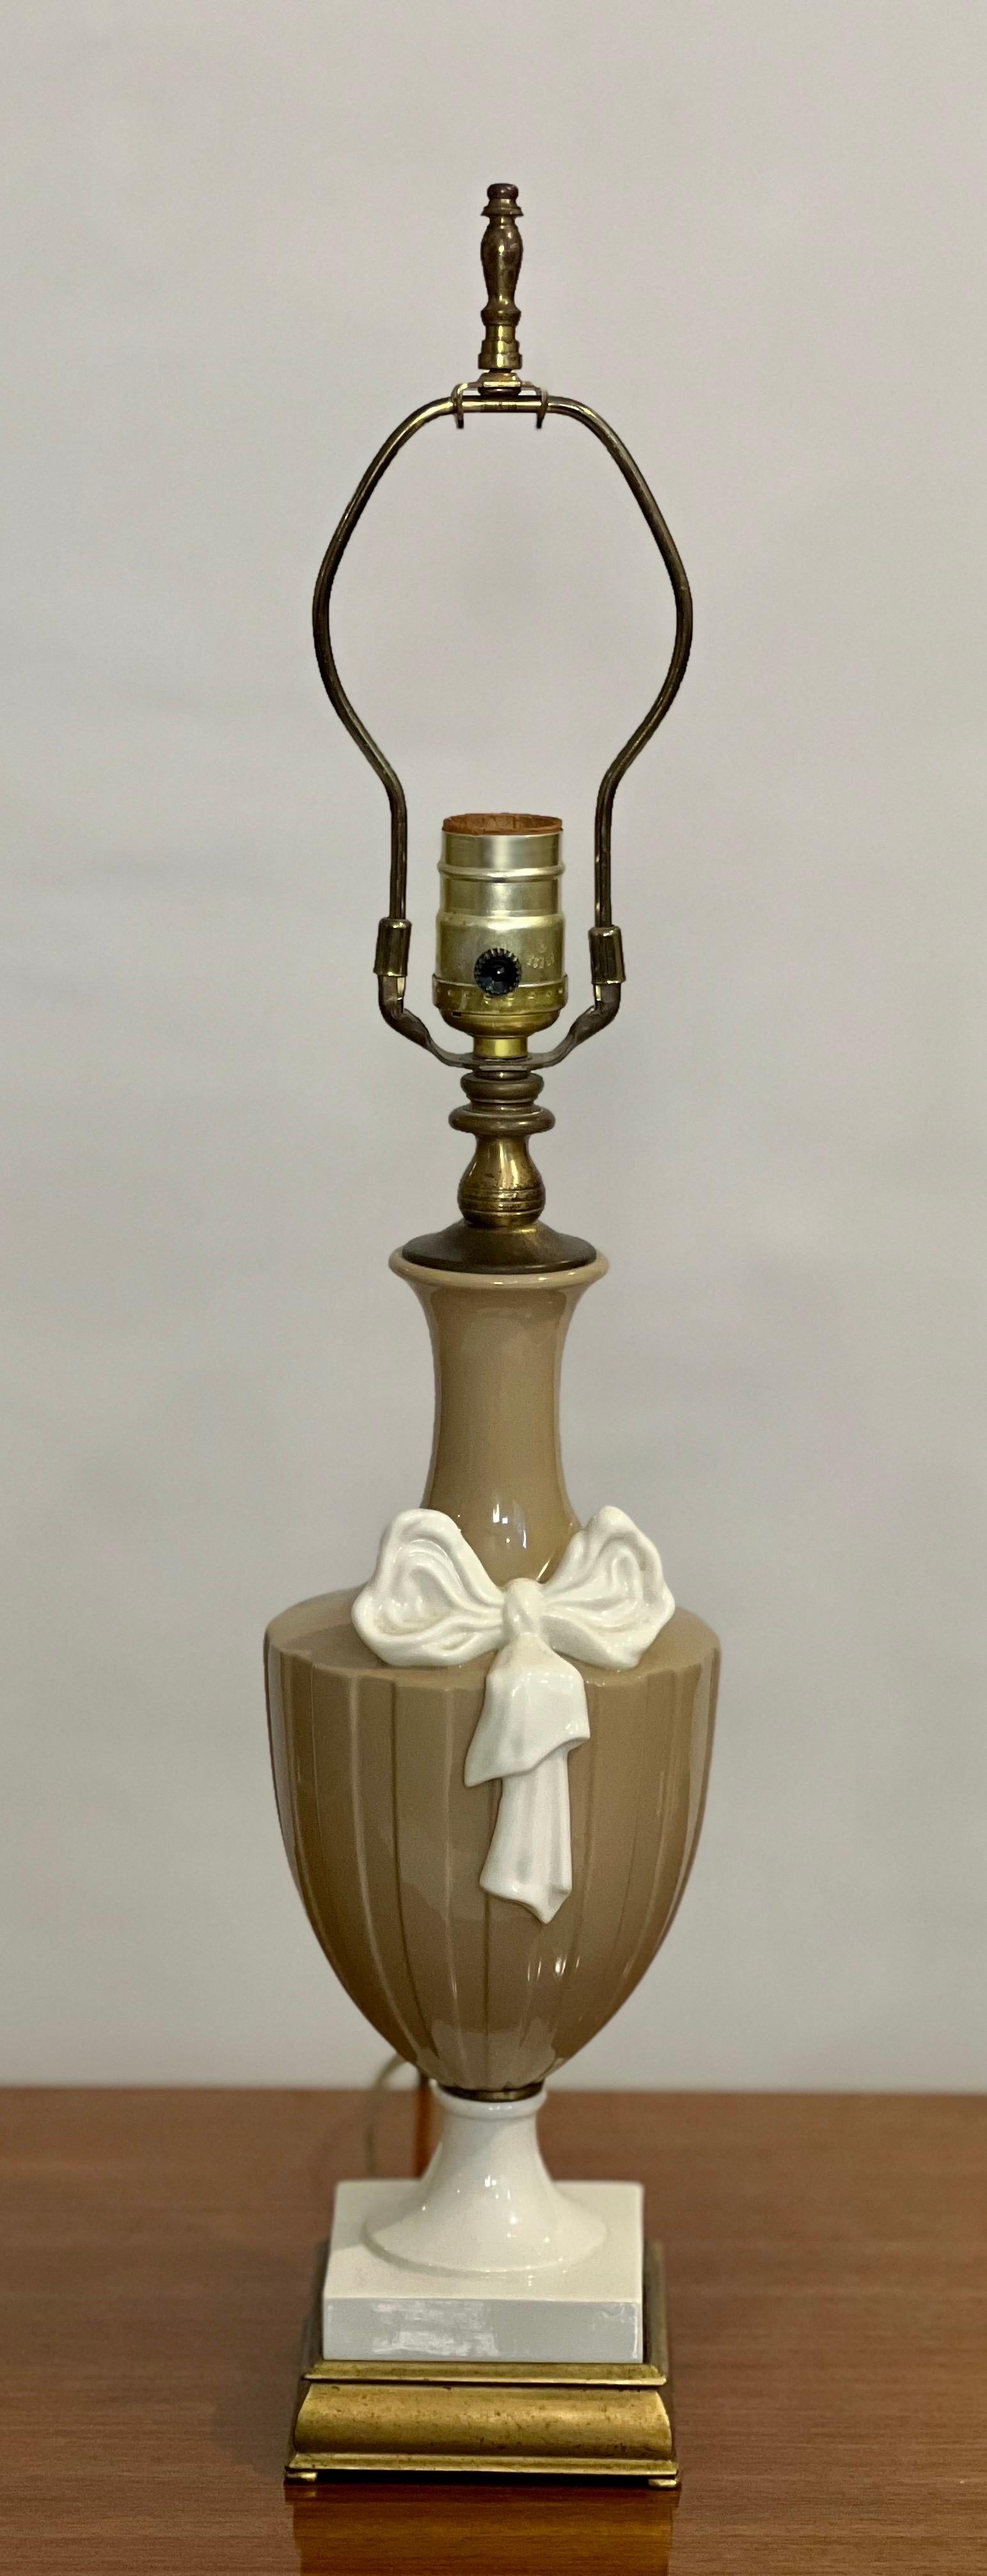 20th Century Lenox Porcelain Lamps in Taupe and White by Dav Art, NY, Pair In Good Condition For Sale In Doylestown, PA